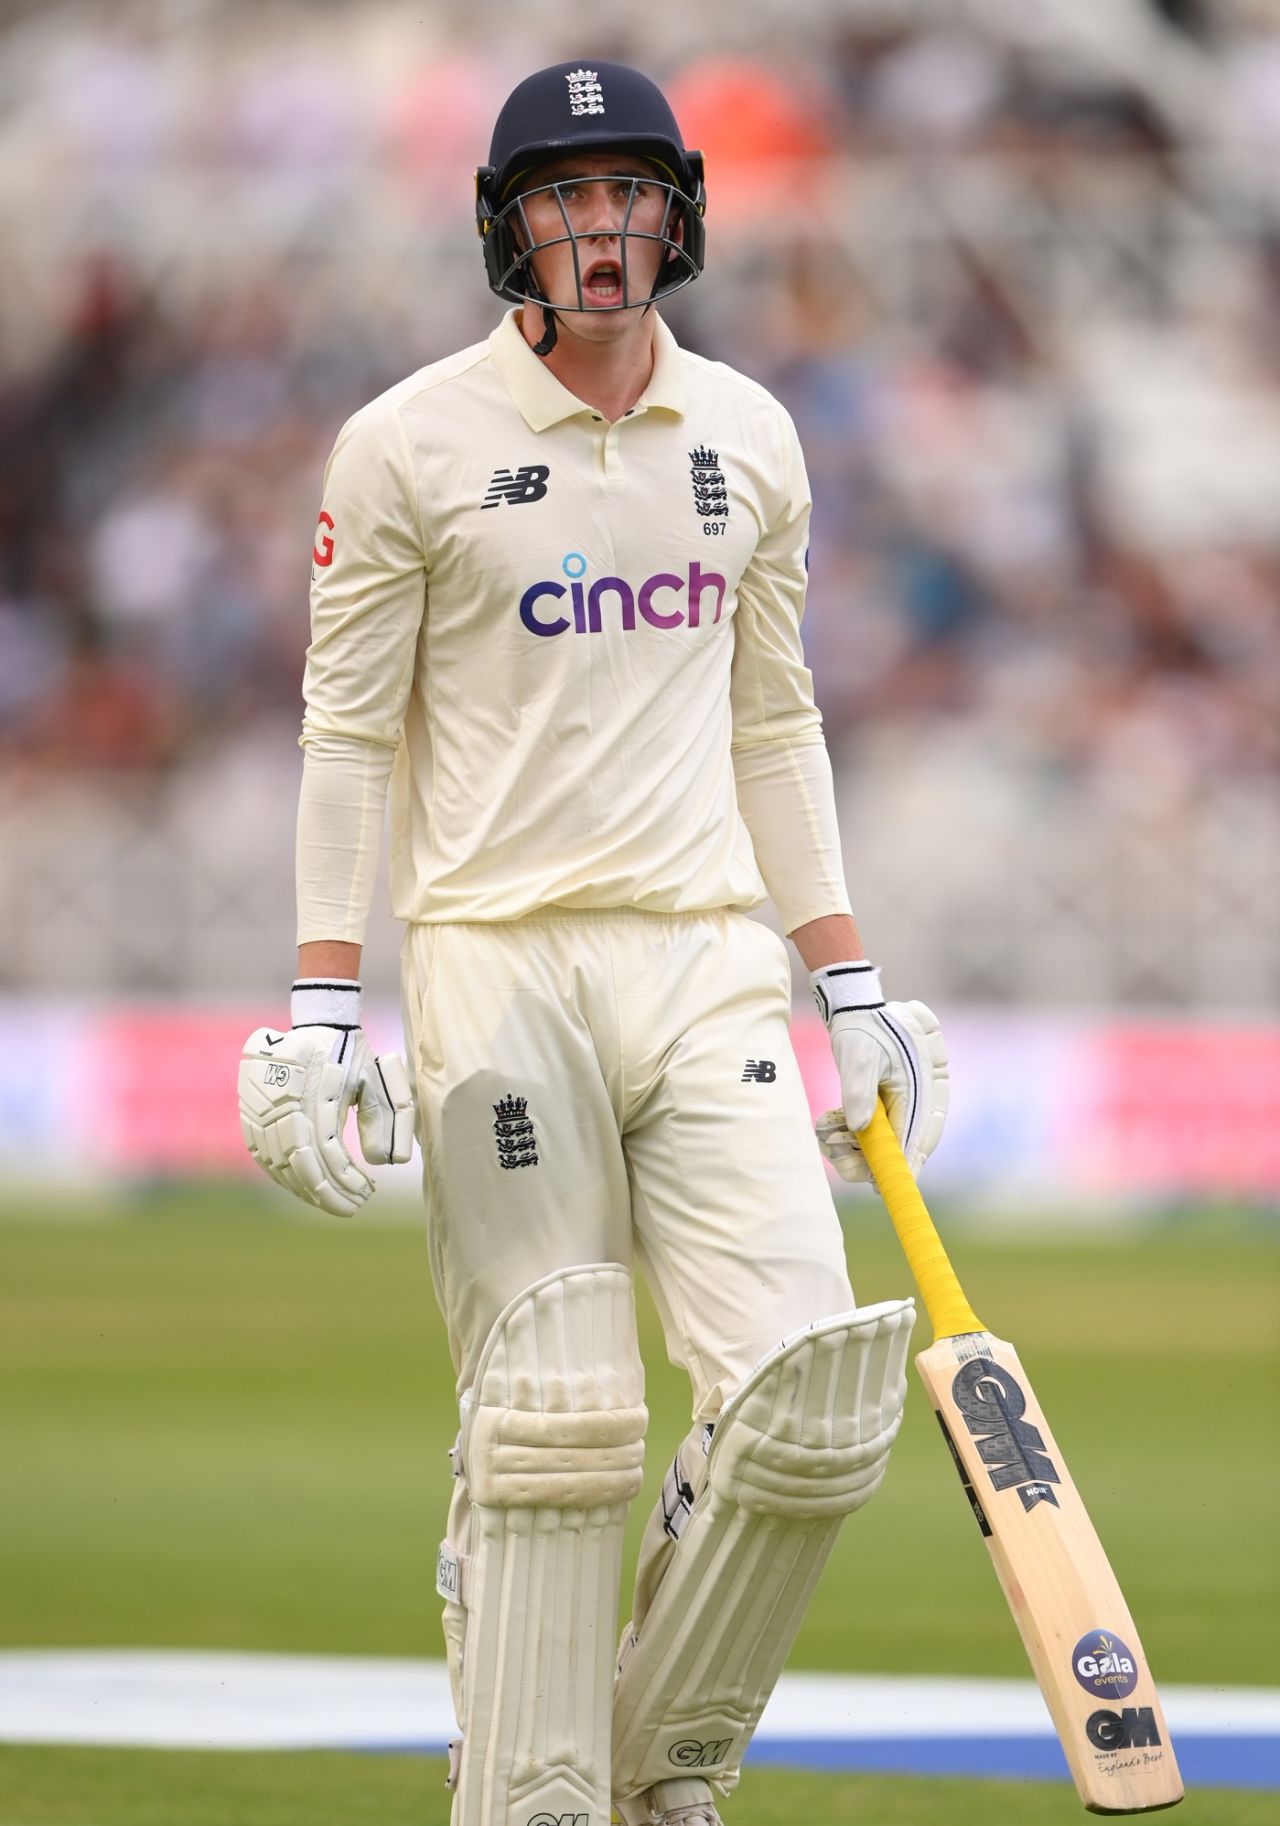 Dan Lawrence walks back after bagging a duck, England vs India, 1st Test, Nottingham, 1st day, August 4, 2021